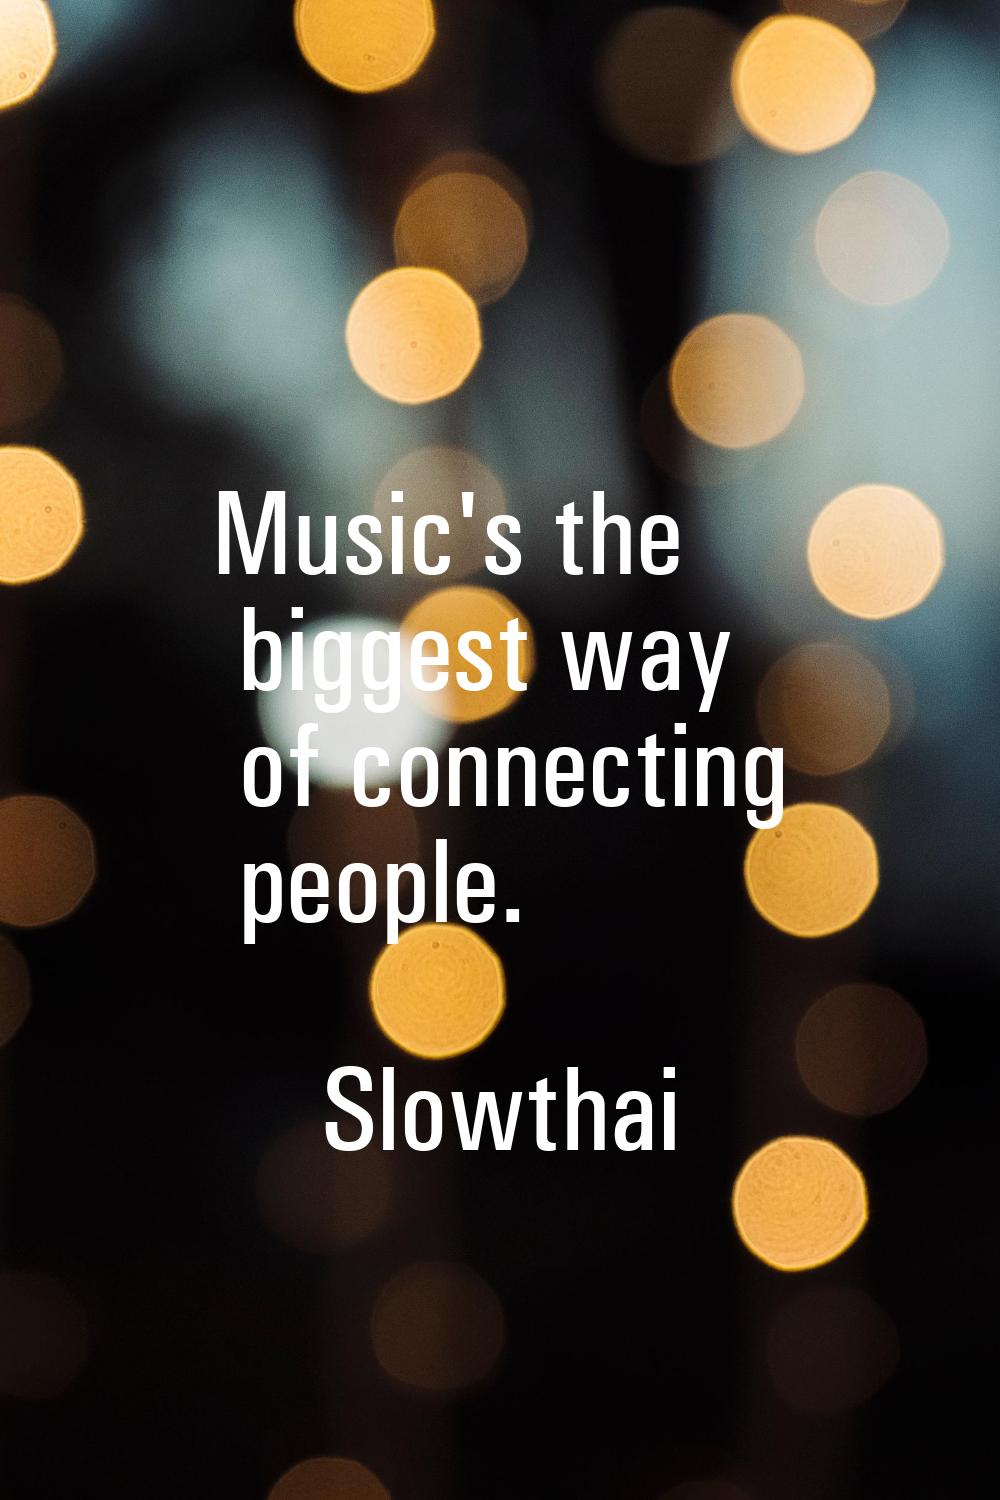 Music's the biggest way of connecting people.